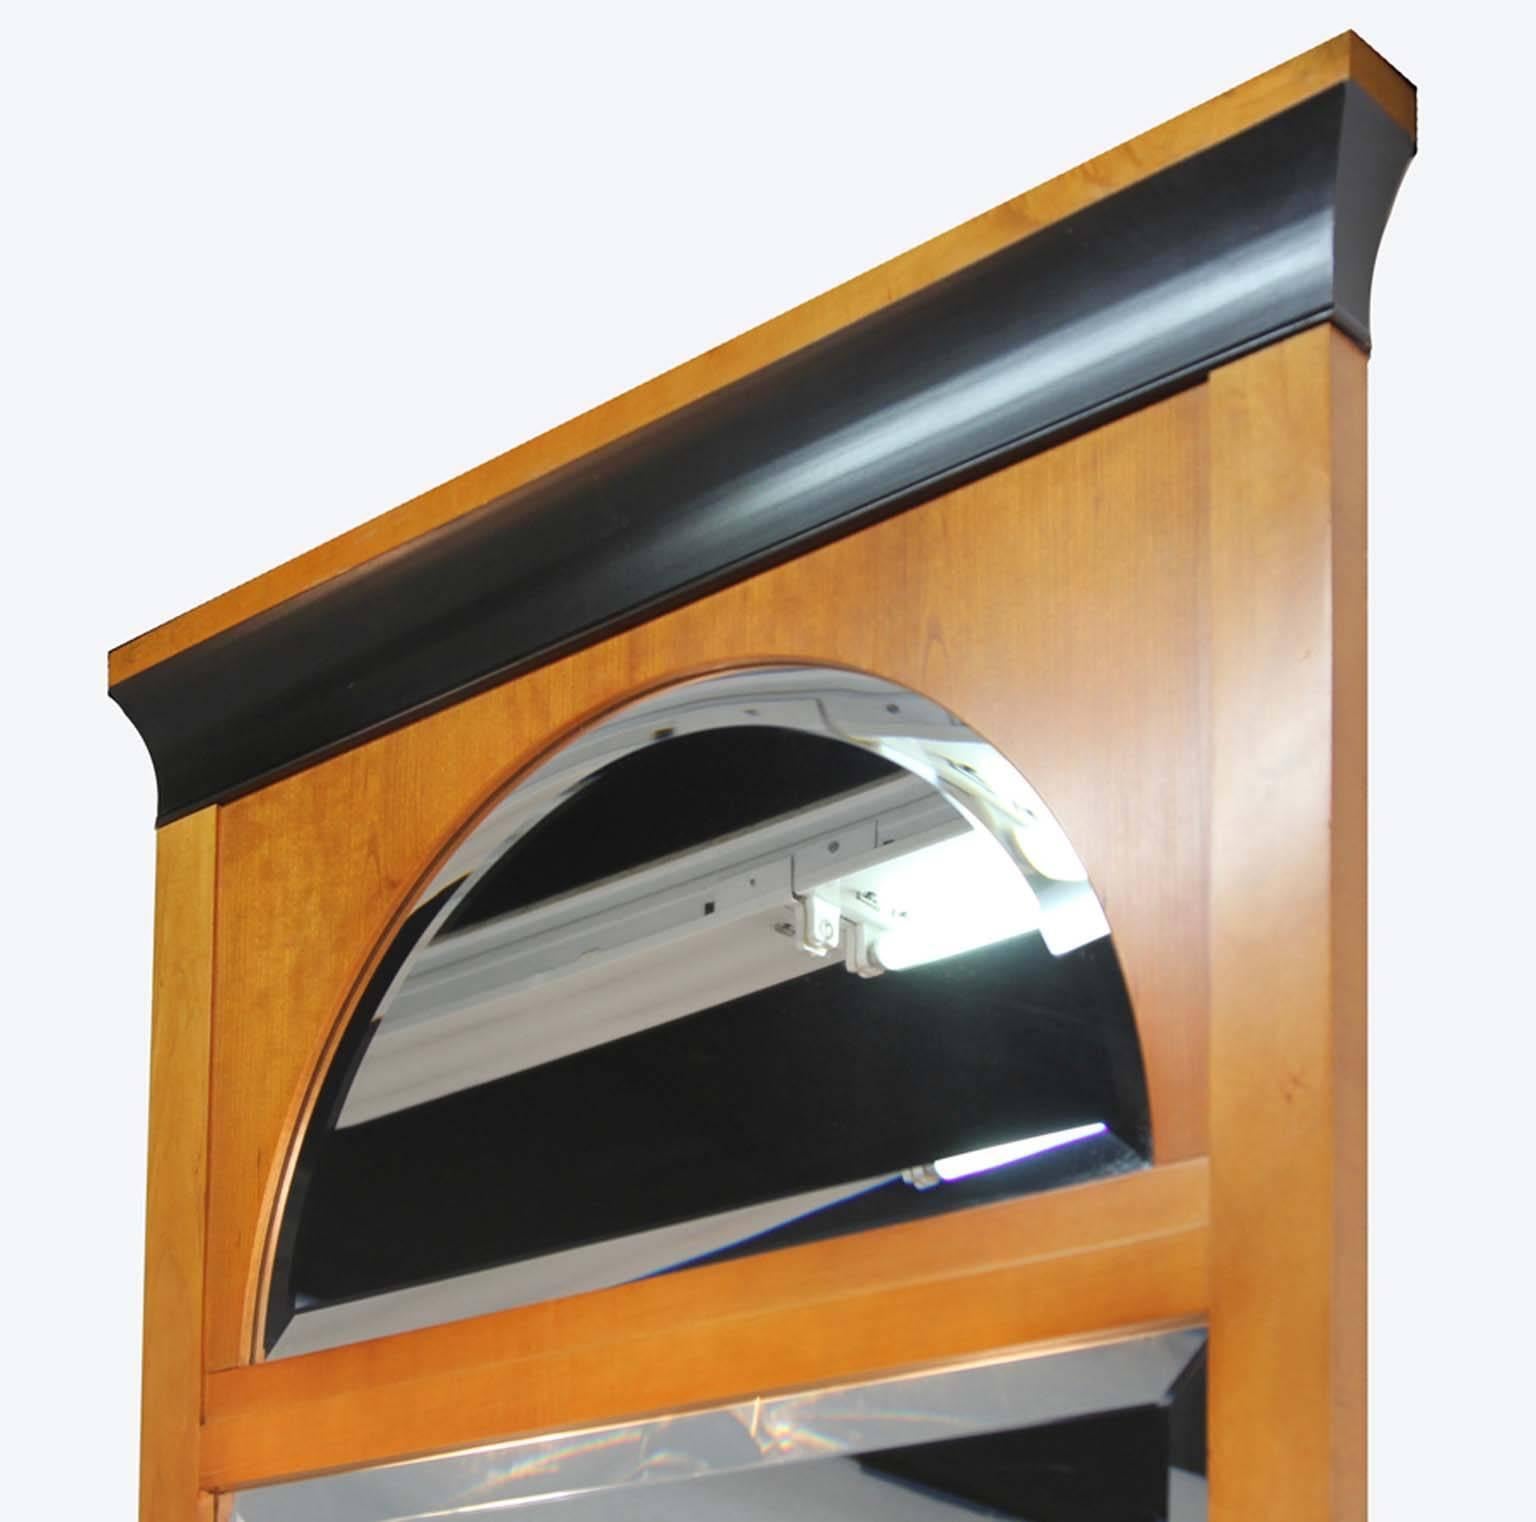 A versatile solid maple mirror with ebonized details and two beveled glass panels.